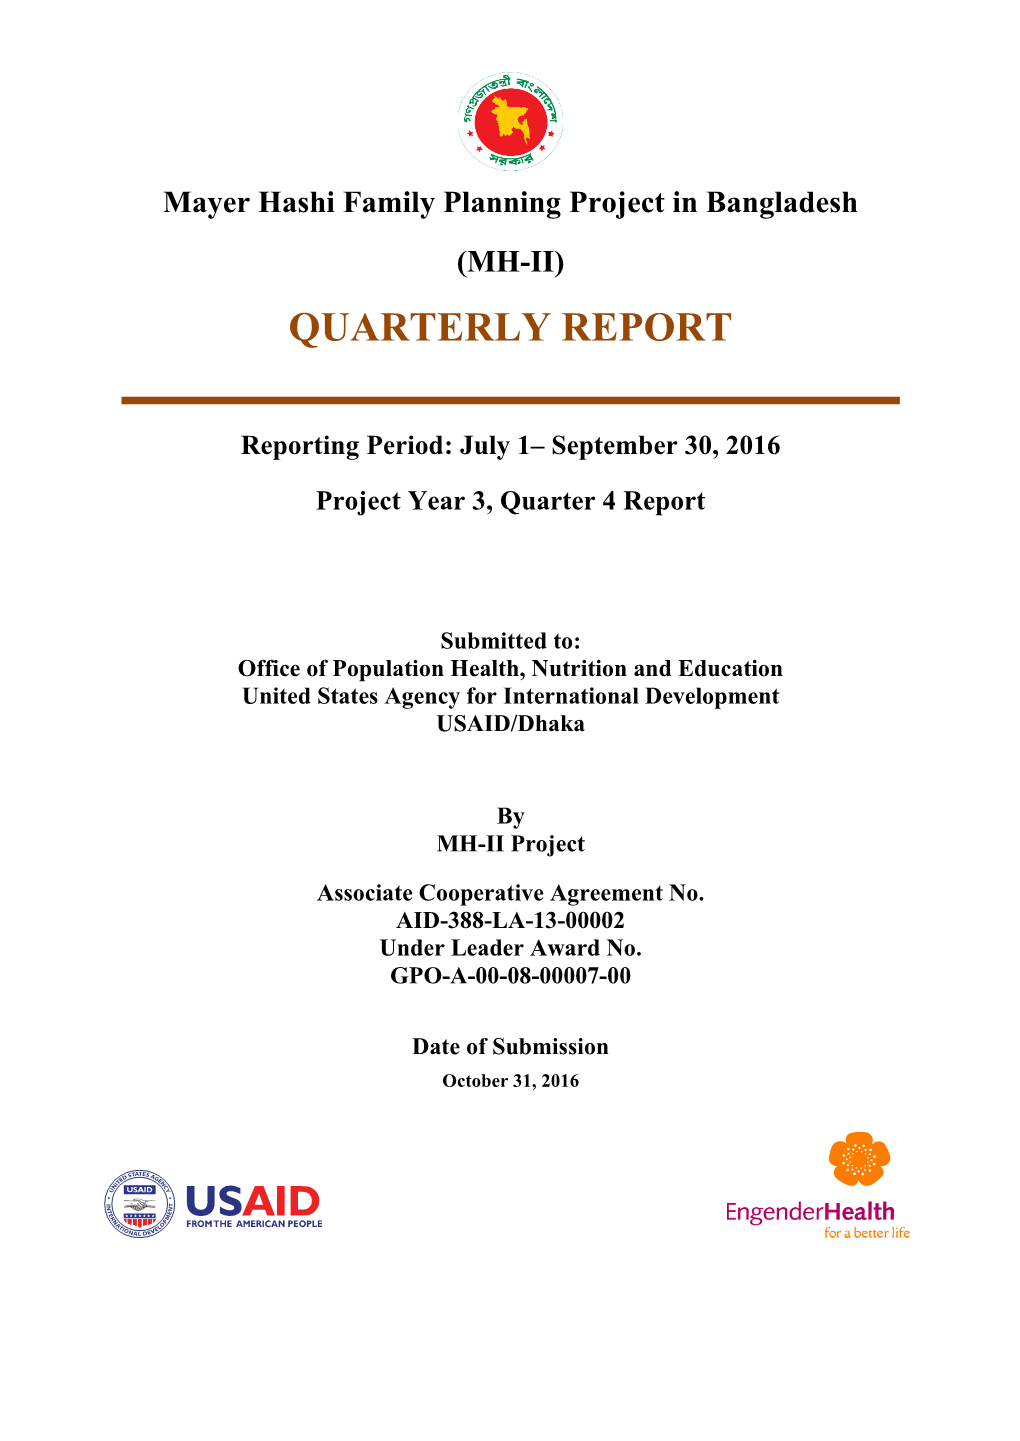 July 1– September 30, 2016 Project Year 3, Quarter 4 Report